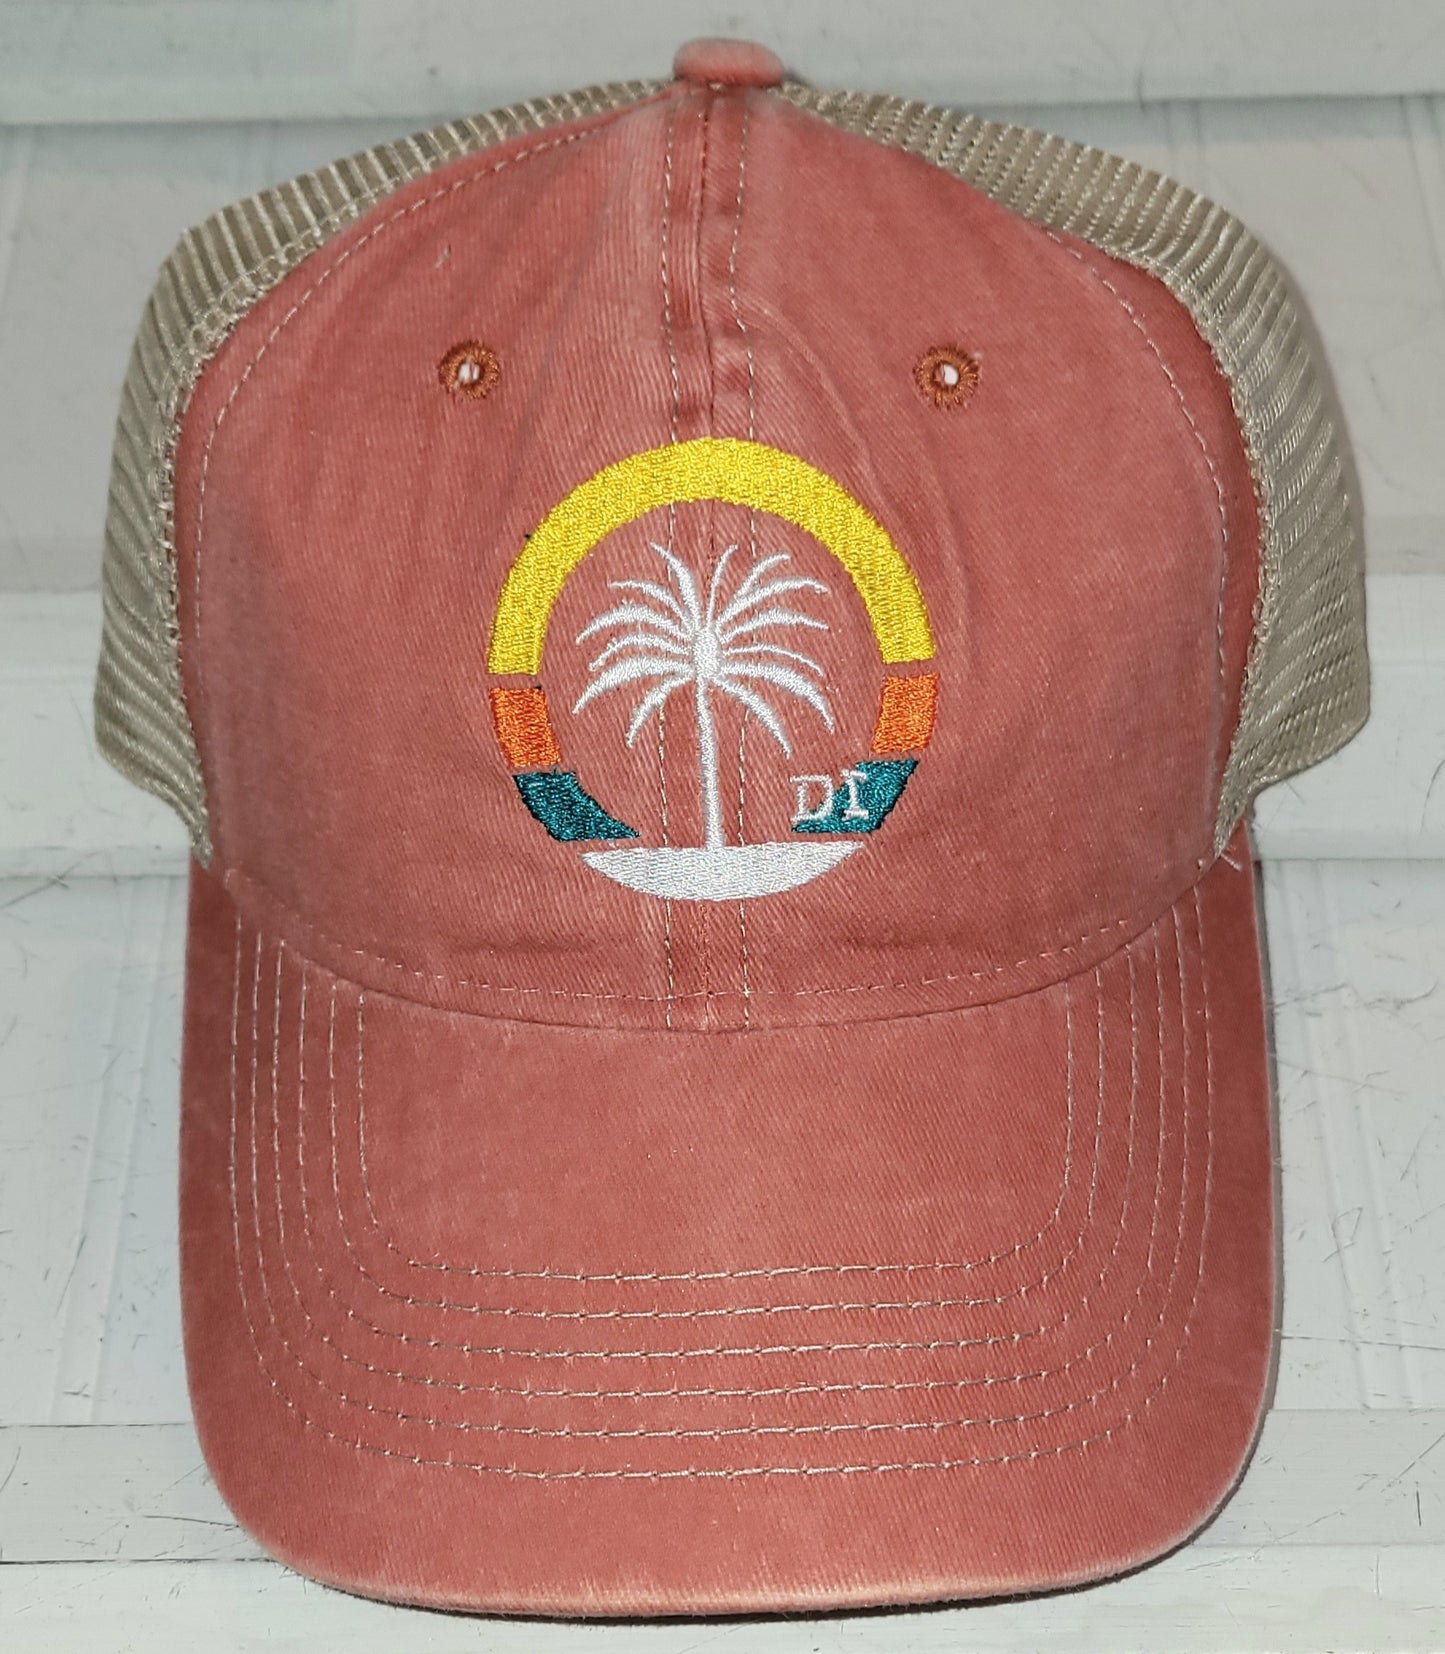 DI EMBROIDERED PALM TRUCKER HAT